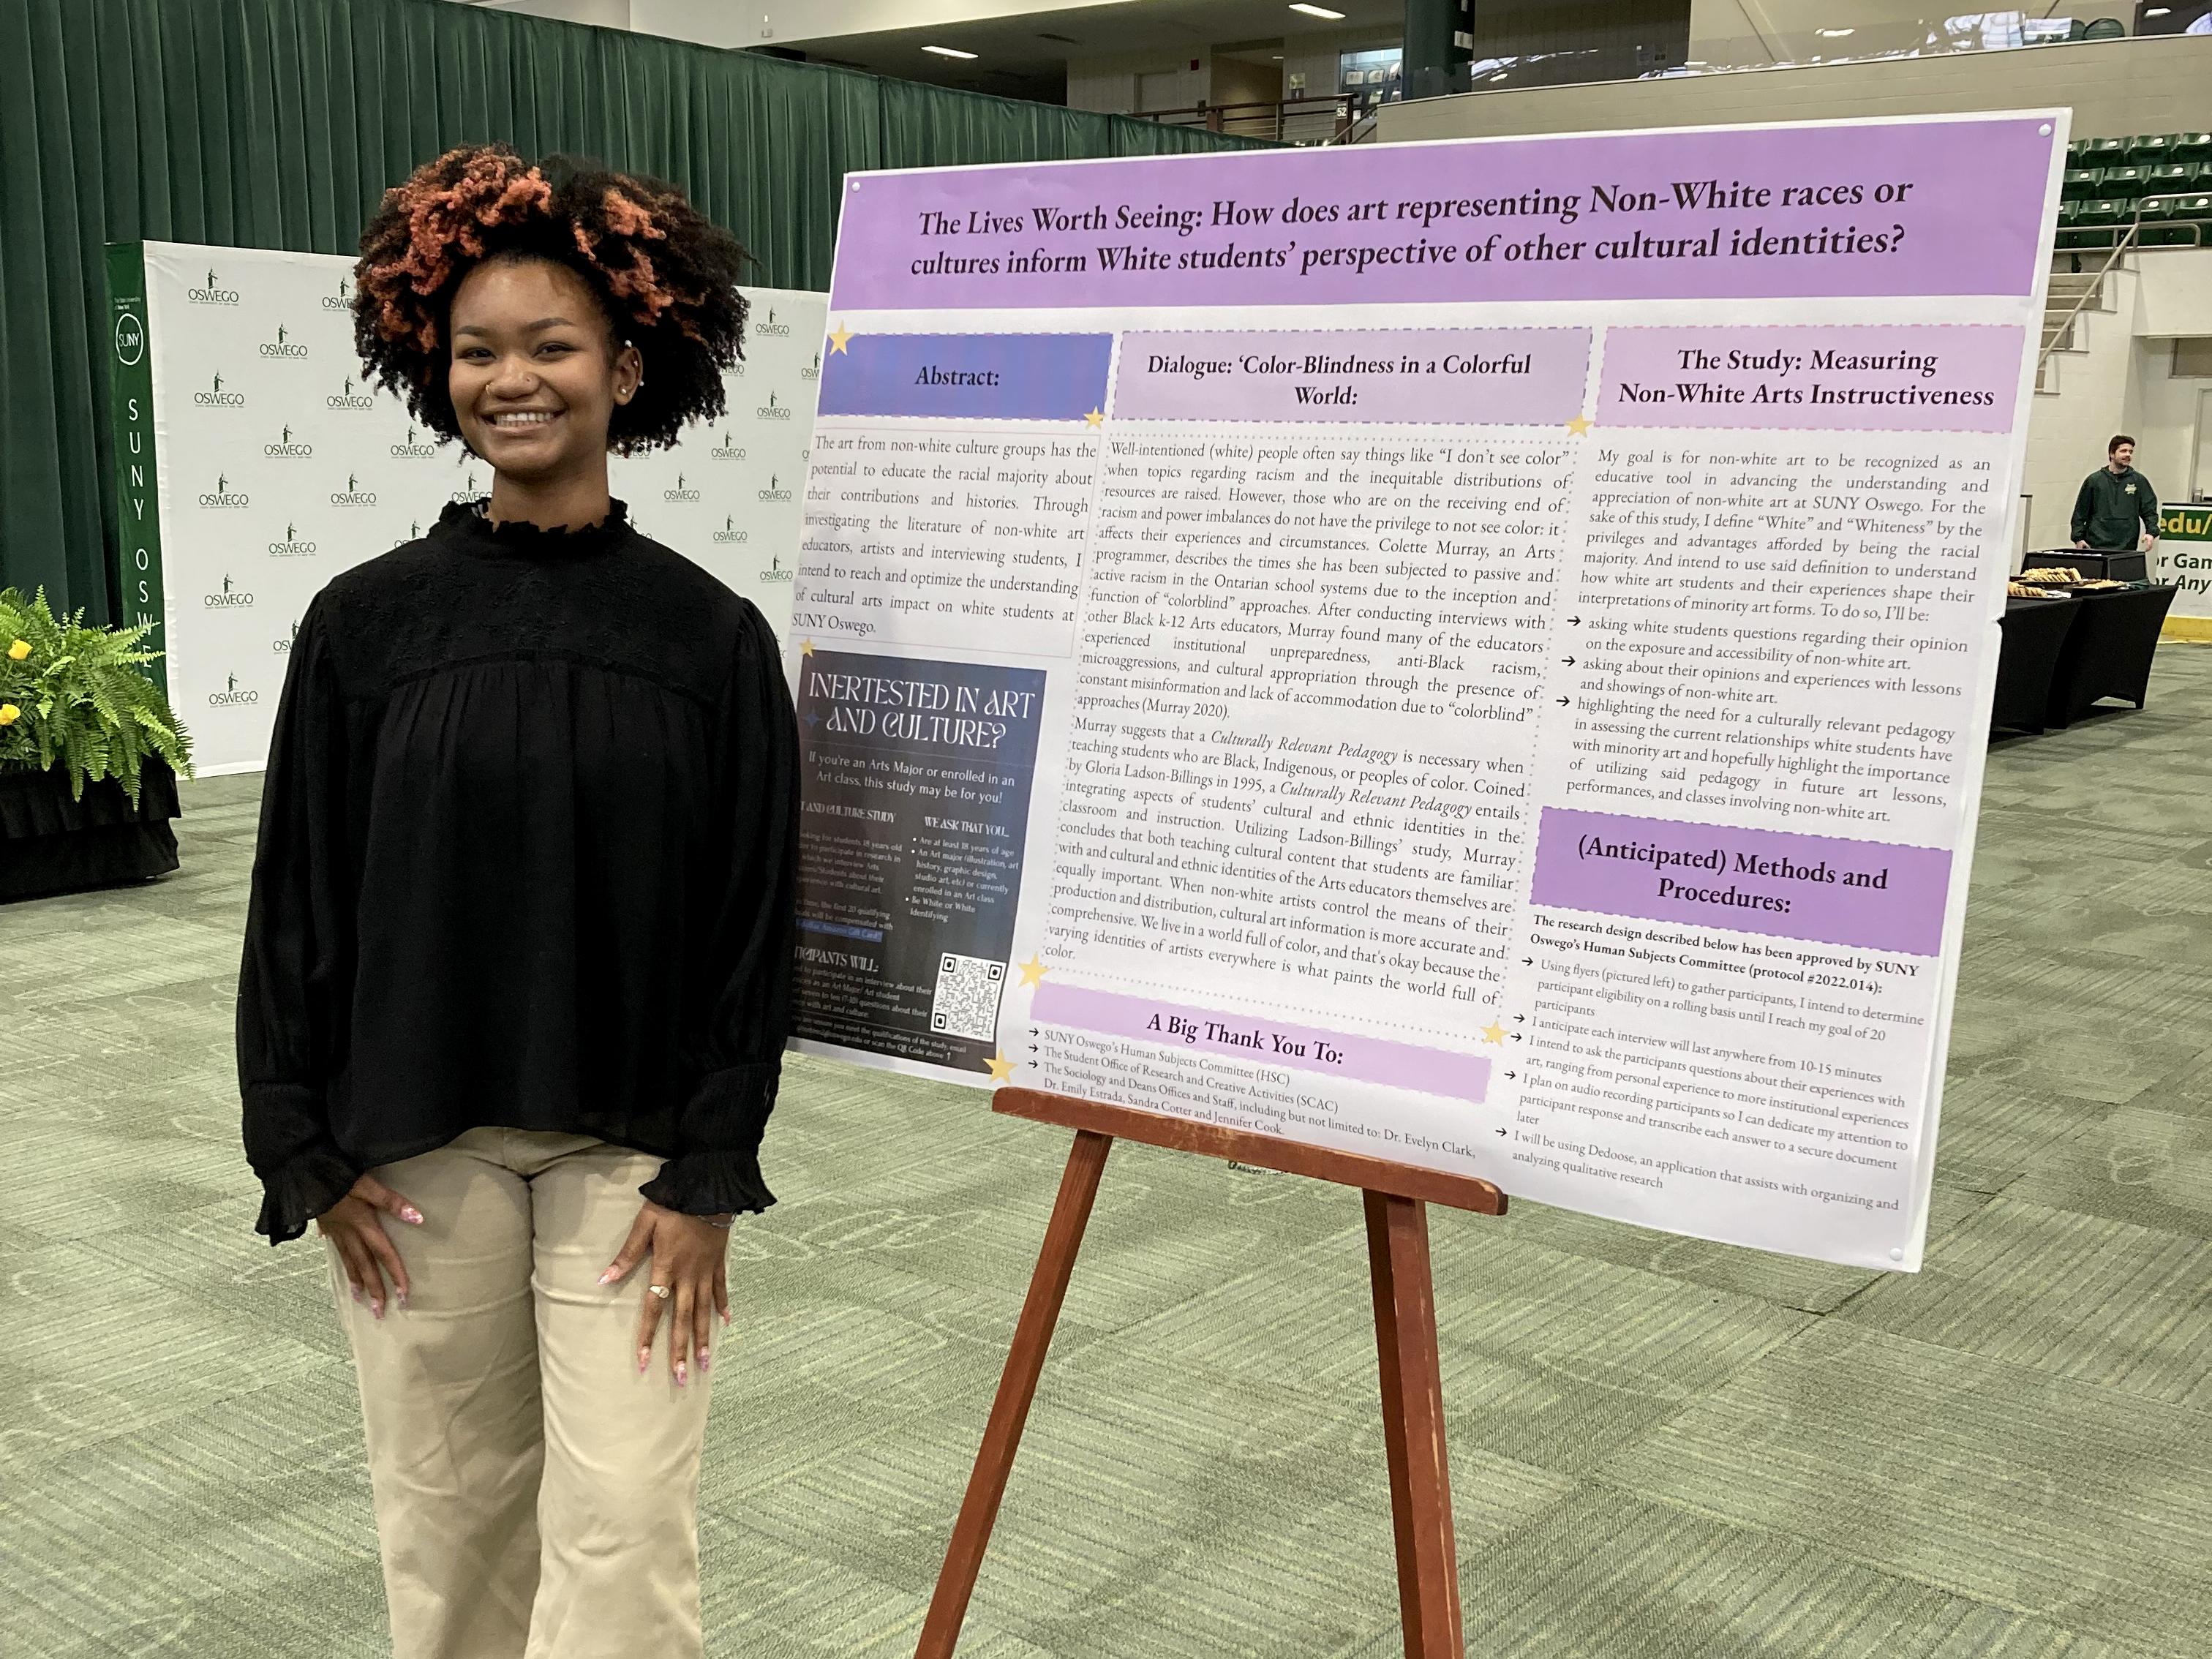 SUNY Oswego junior Infiniti Robinson will study how art performed and created by non-white cultures impact and educate white students on campus